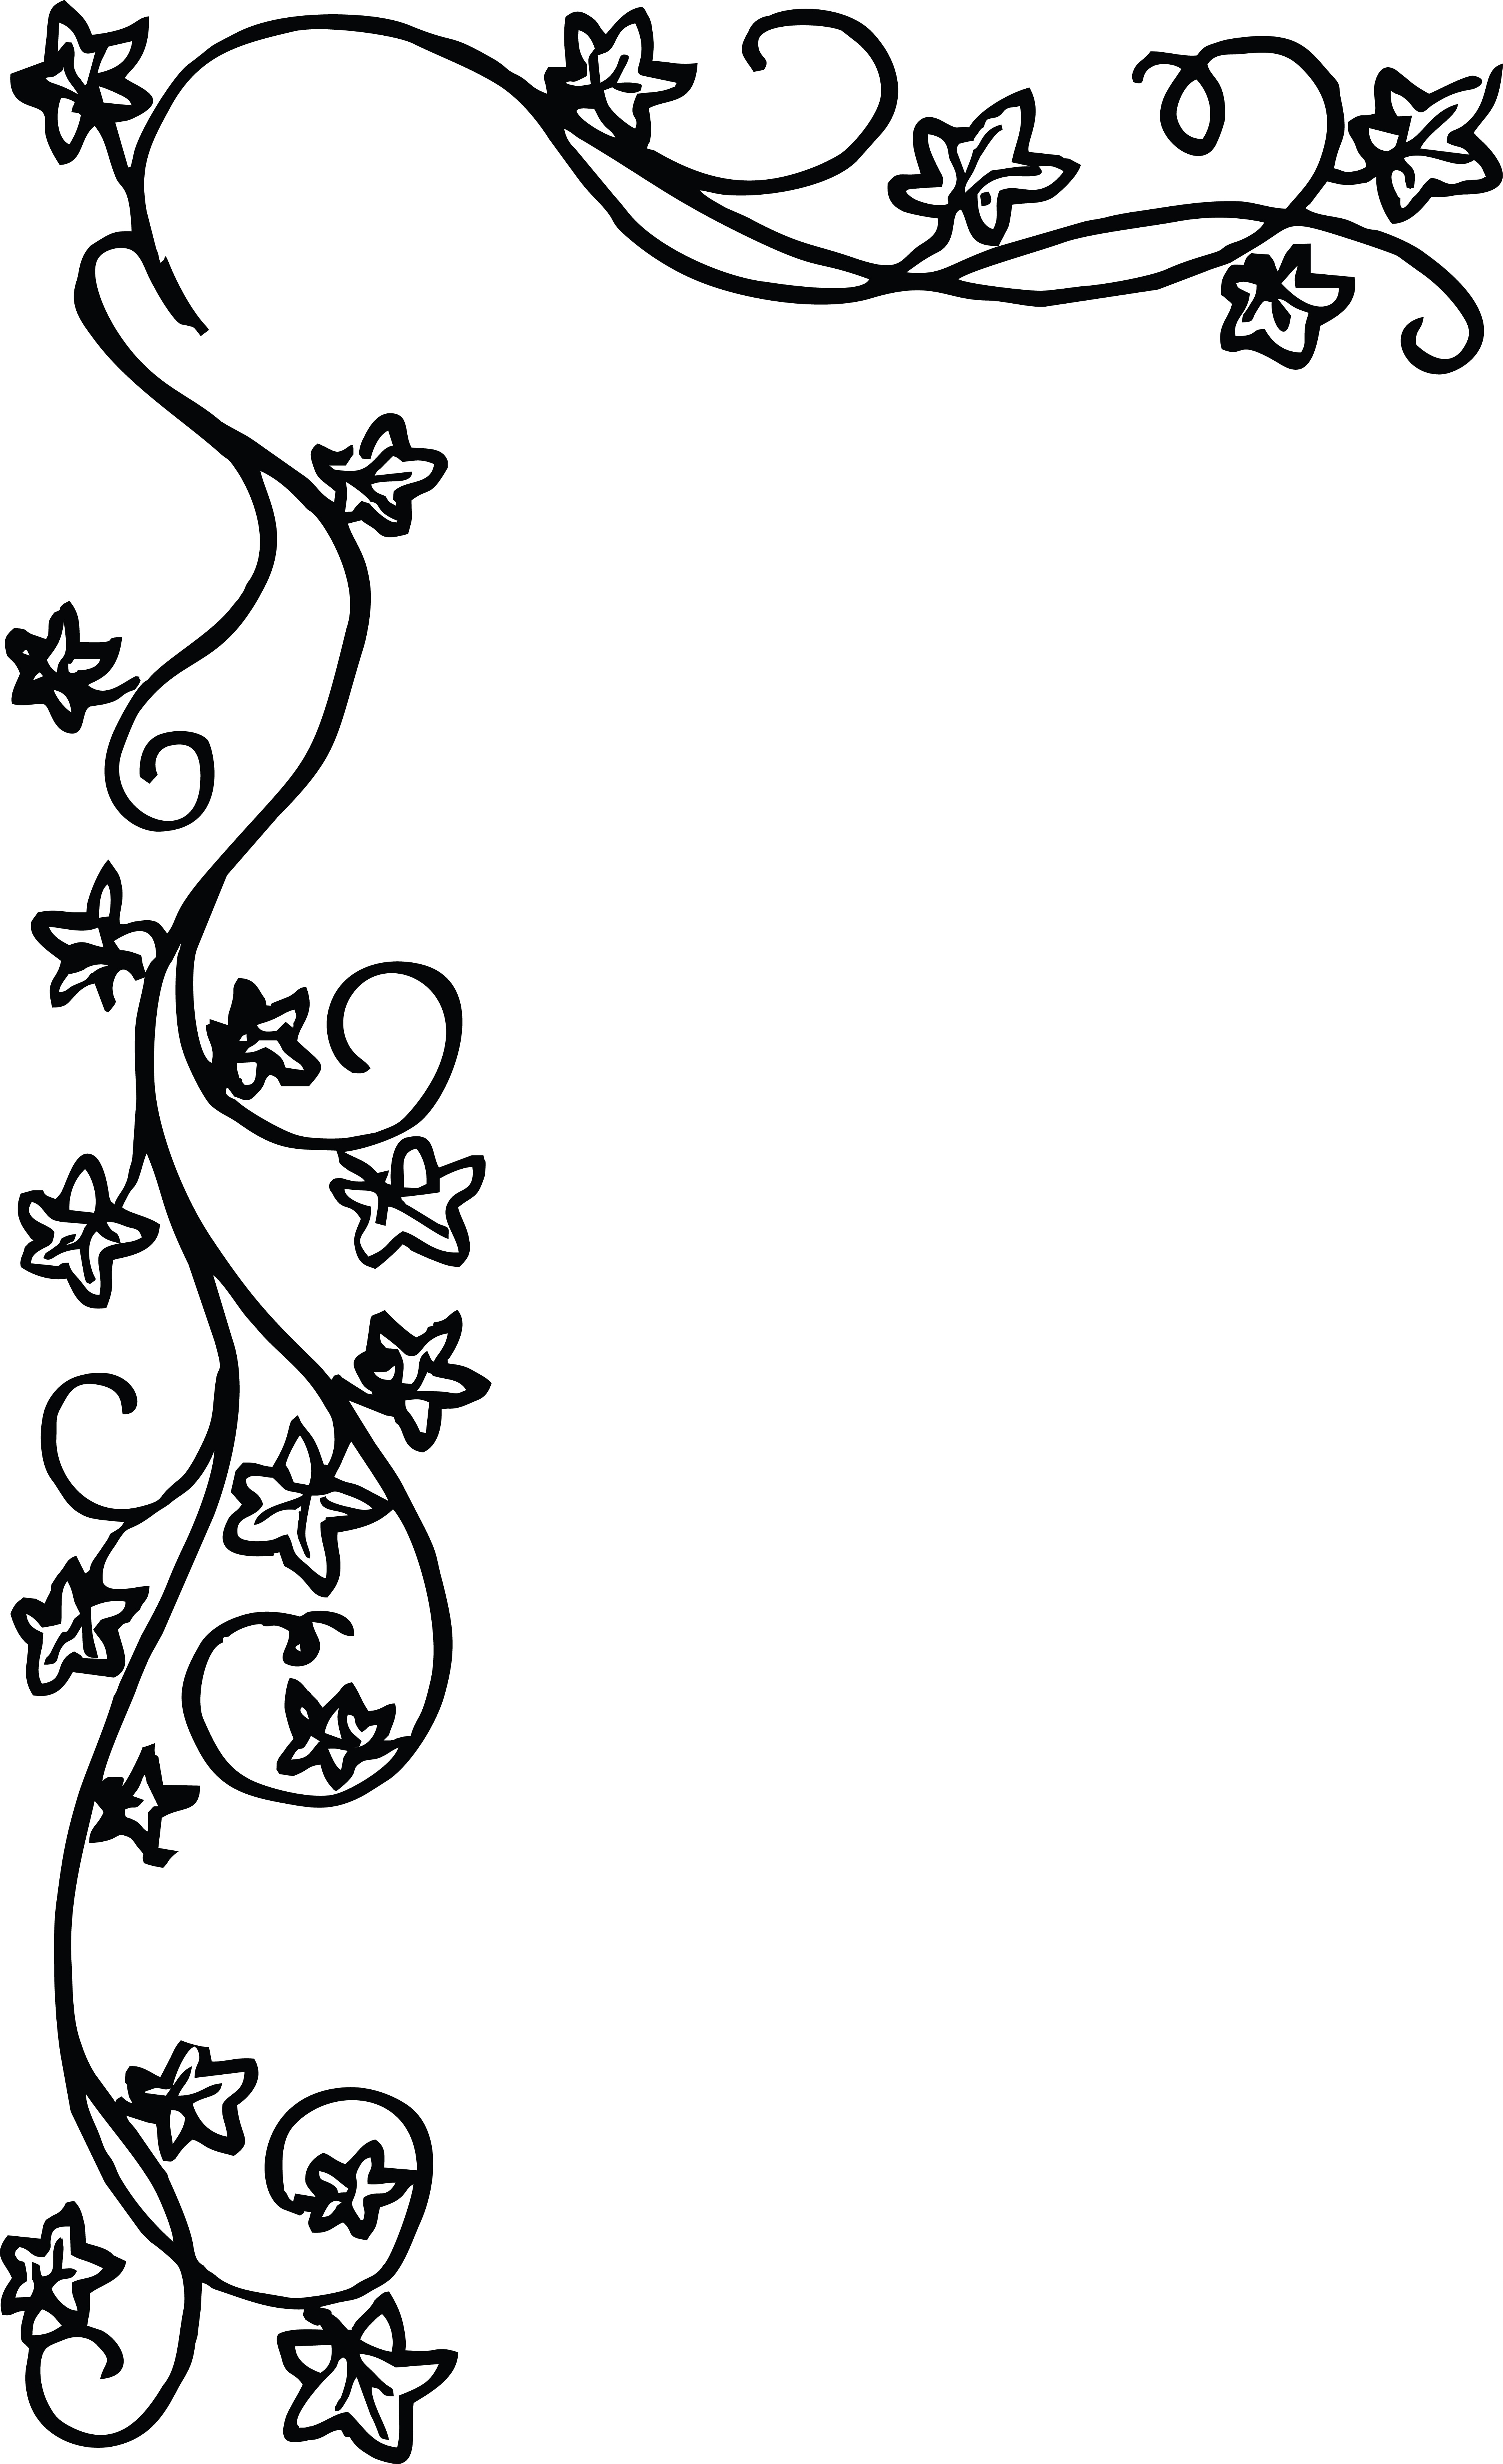 Download Free Clipart of a floral border